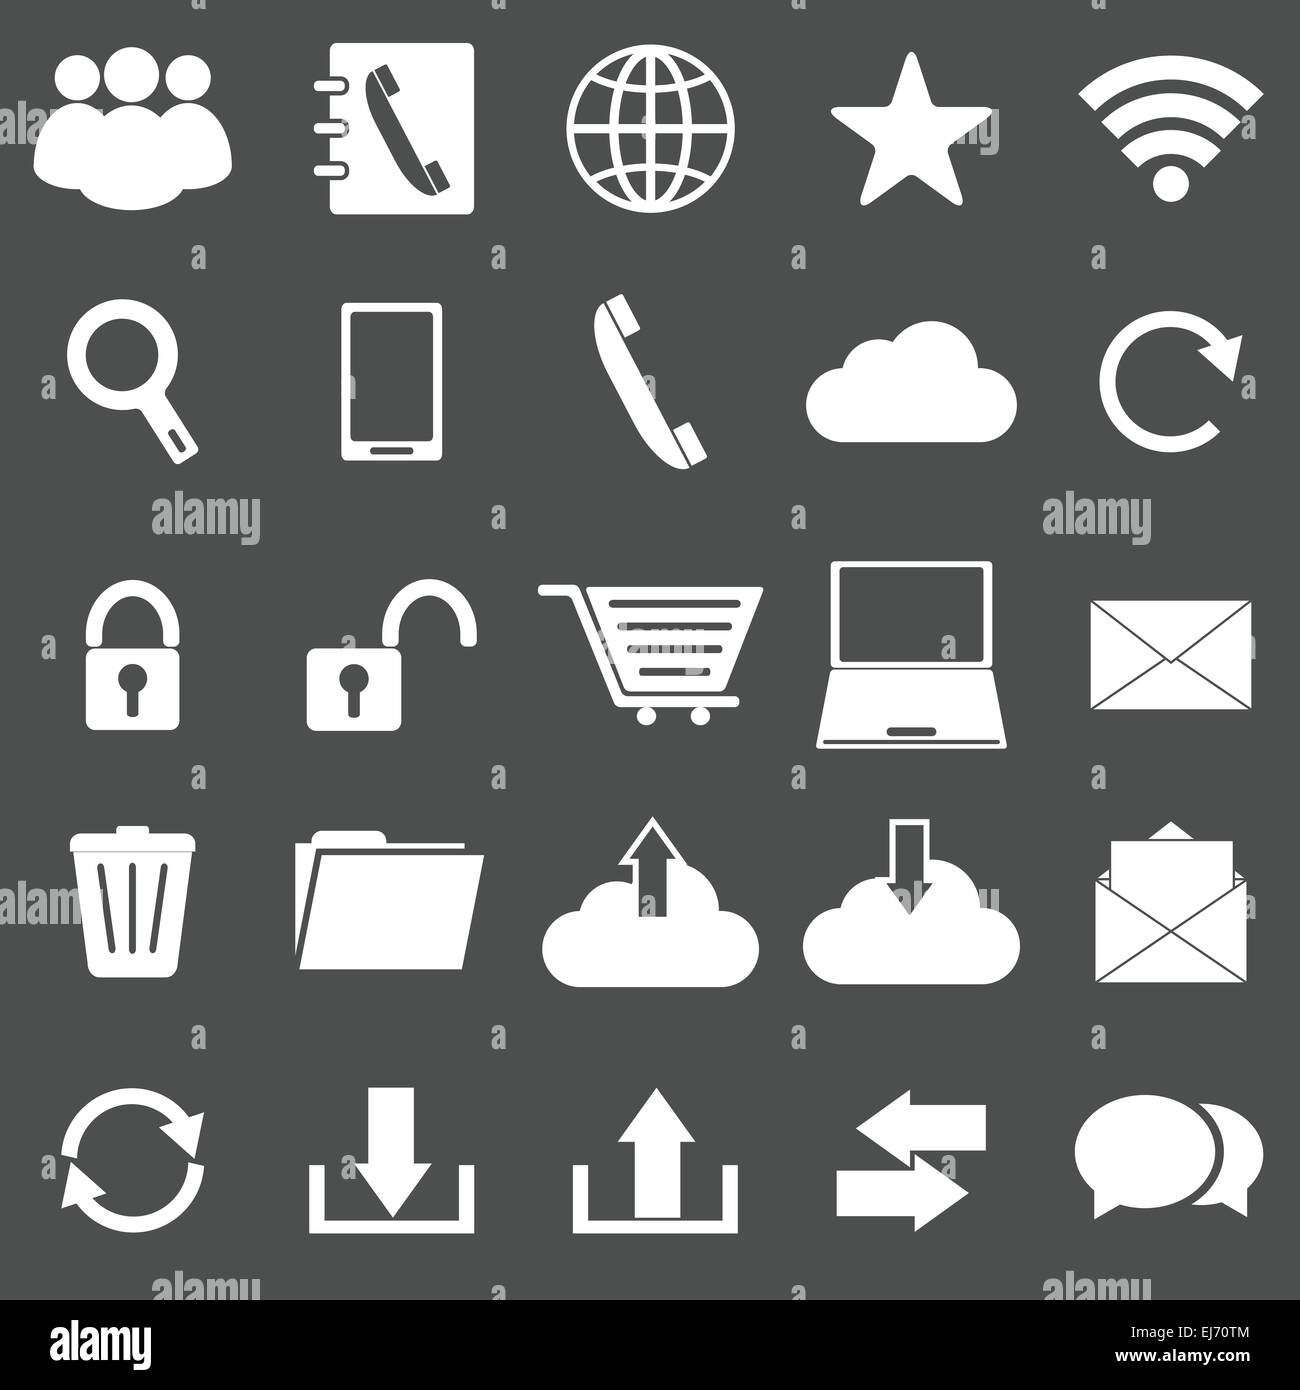 Communication icons on gray background, stock vector Stock Vector